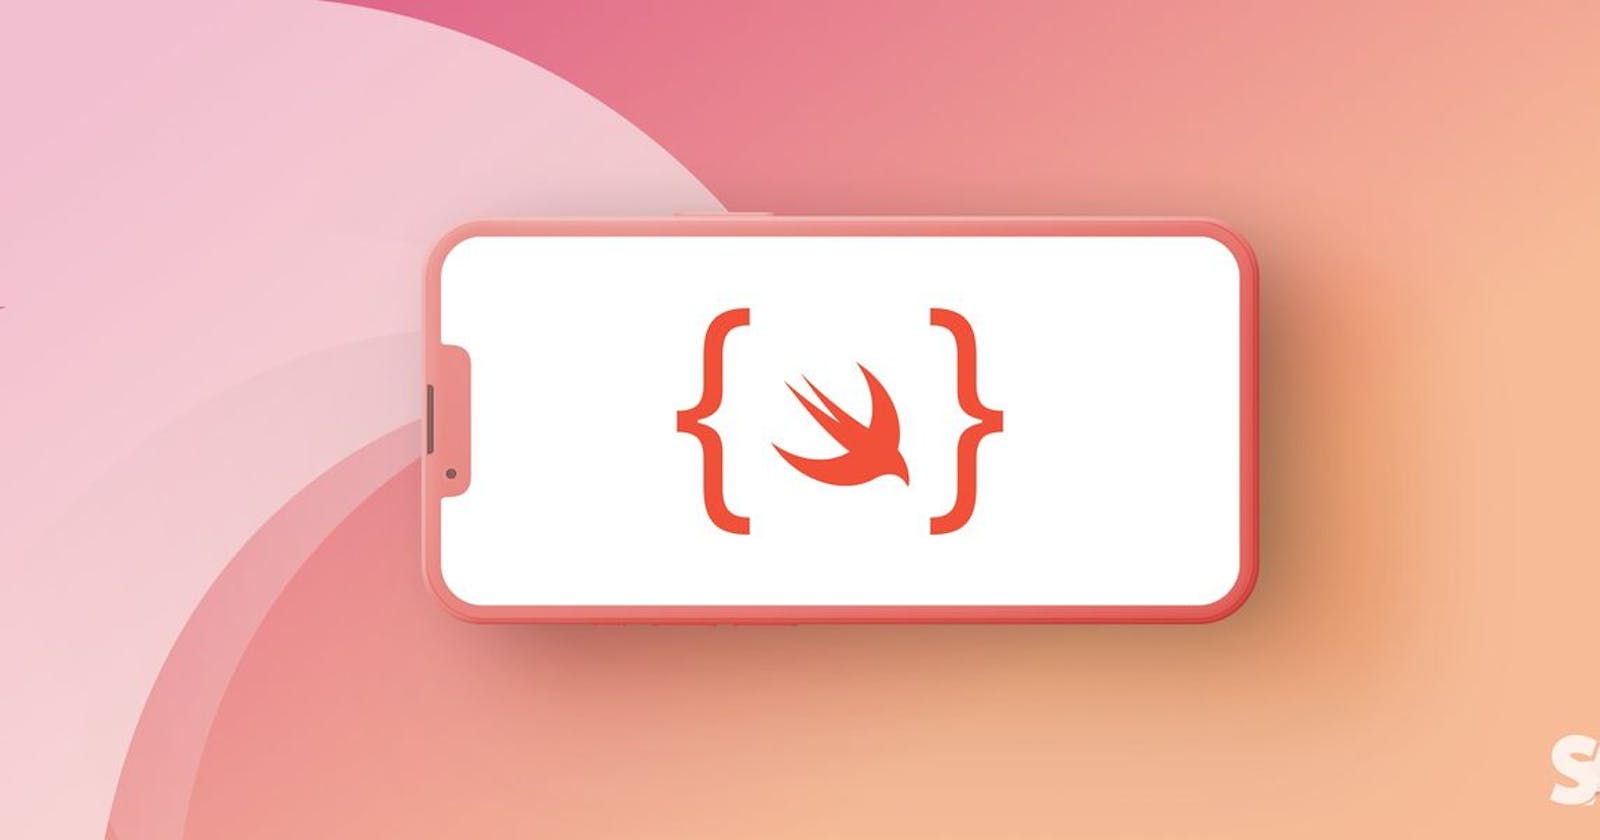 What is Trailing closure in Swift?